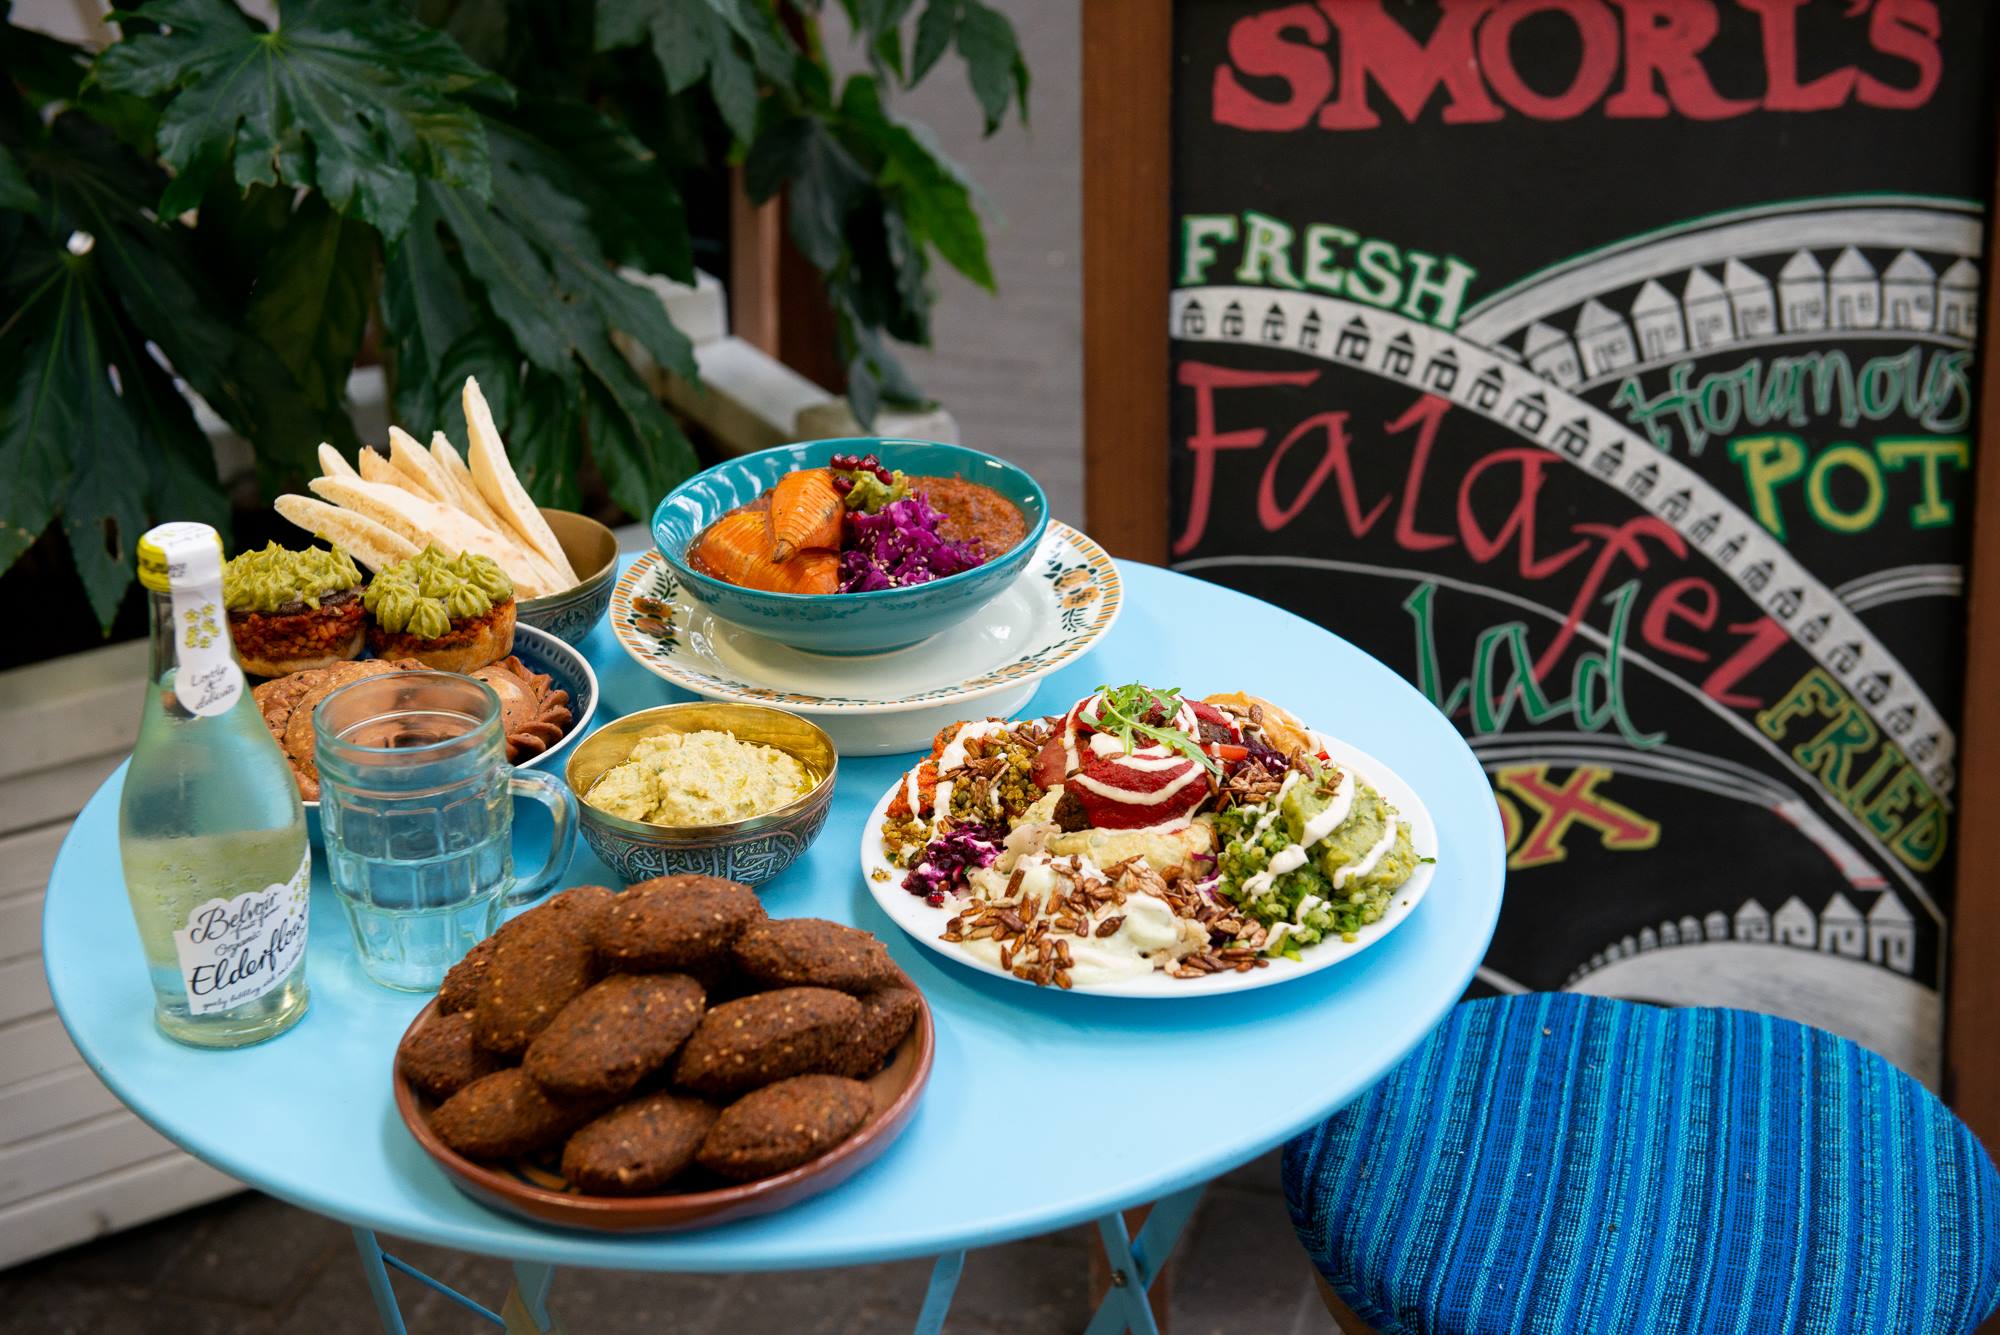 plates-and-bowls-of-food-on-round-blue-table-at-smorls-best-vegan-restaurants-brighton